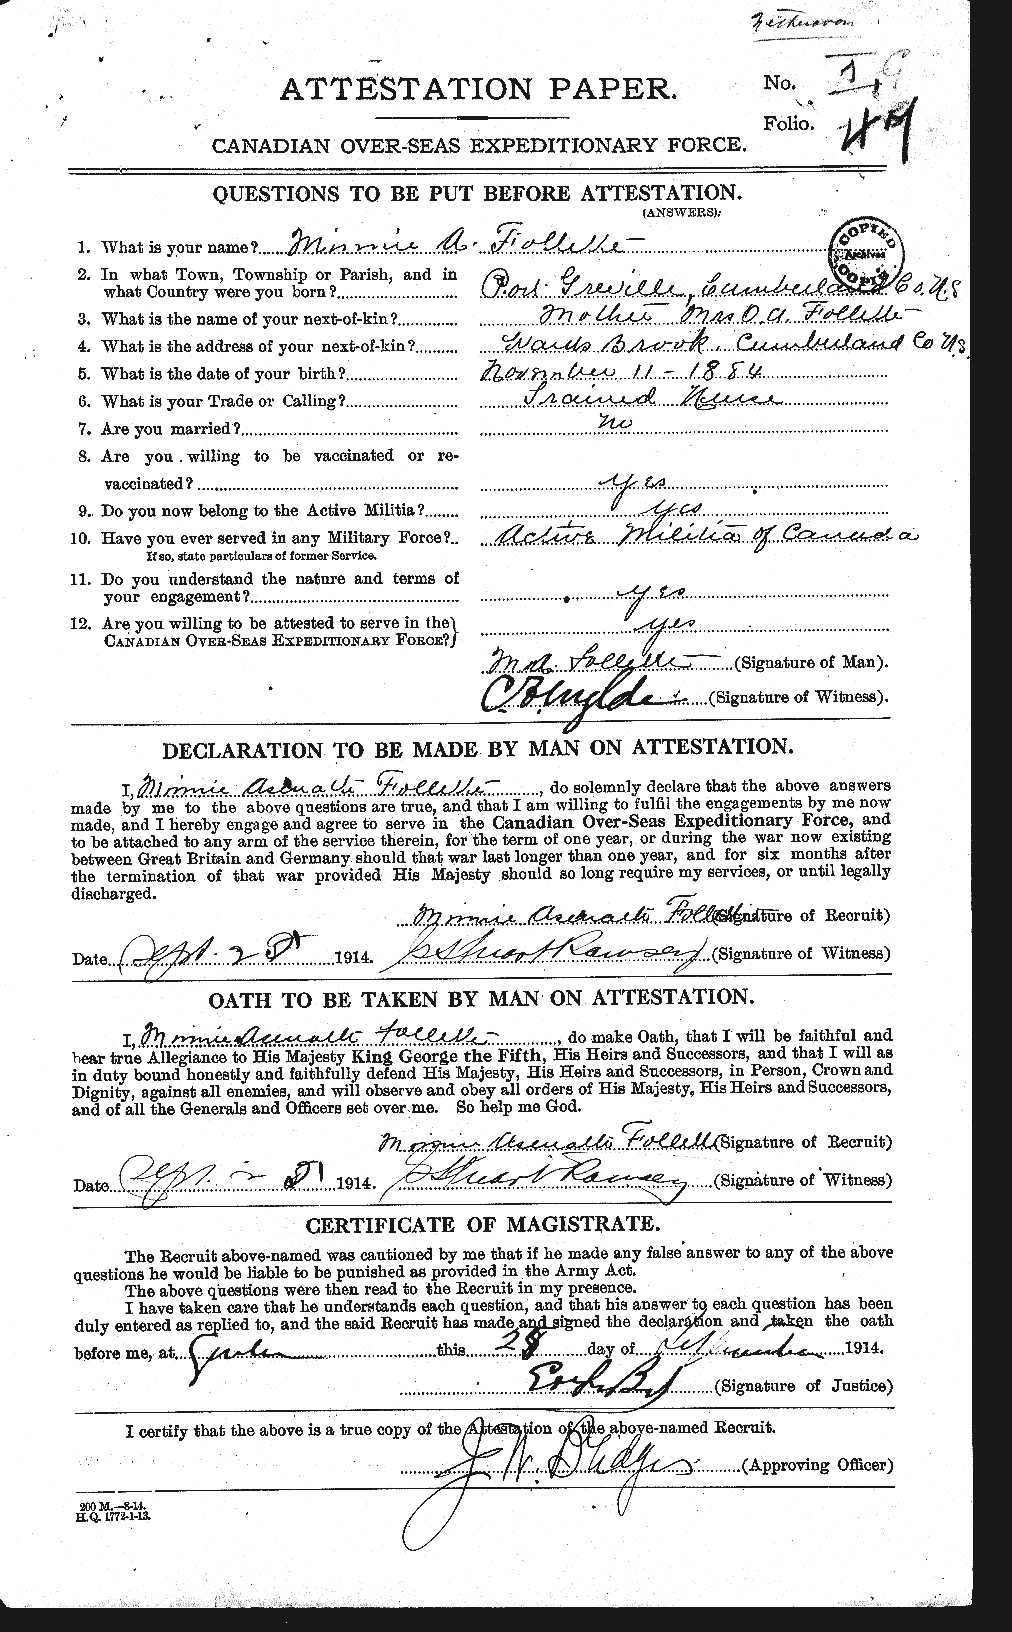 Personnel Records of the First World War - CEF 237289a